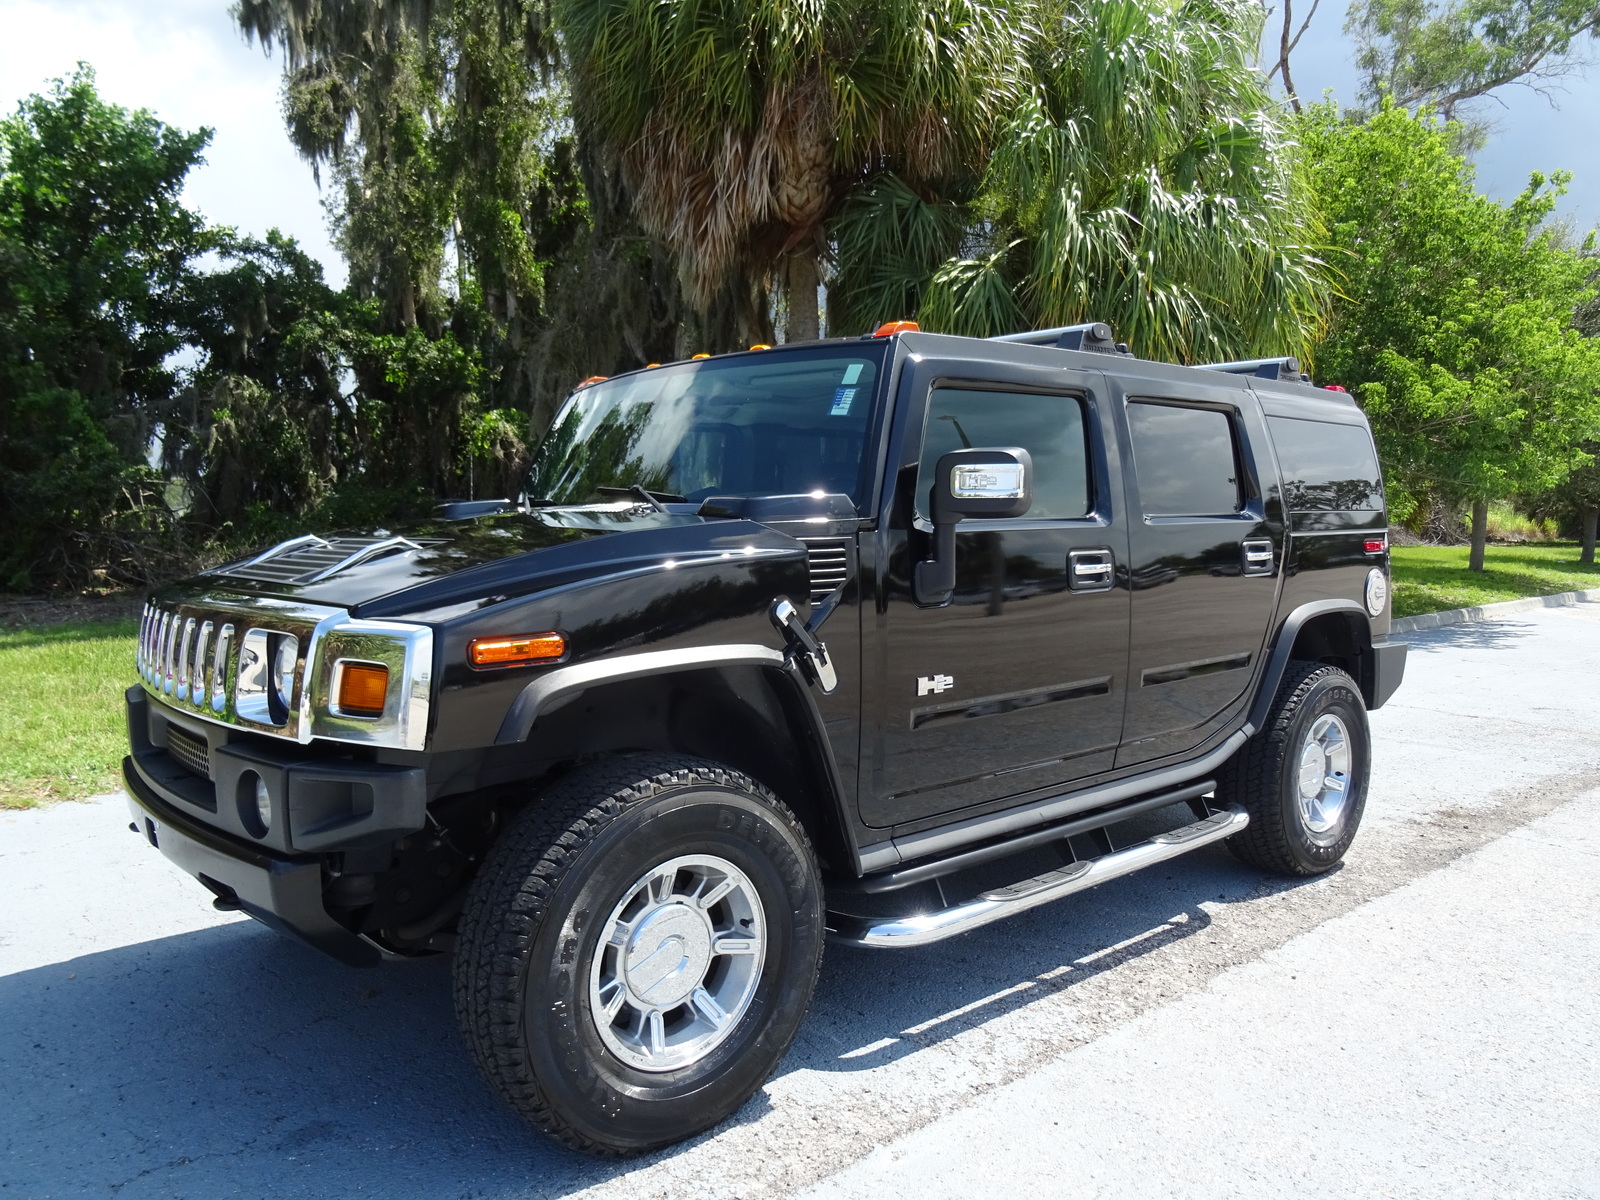 Pre-Owned 2007 HUMMER H2 SUV Sport Utility in Sarasota #LP11637 | Wilde ...